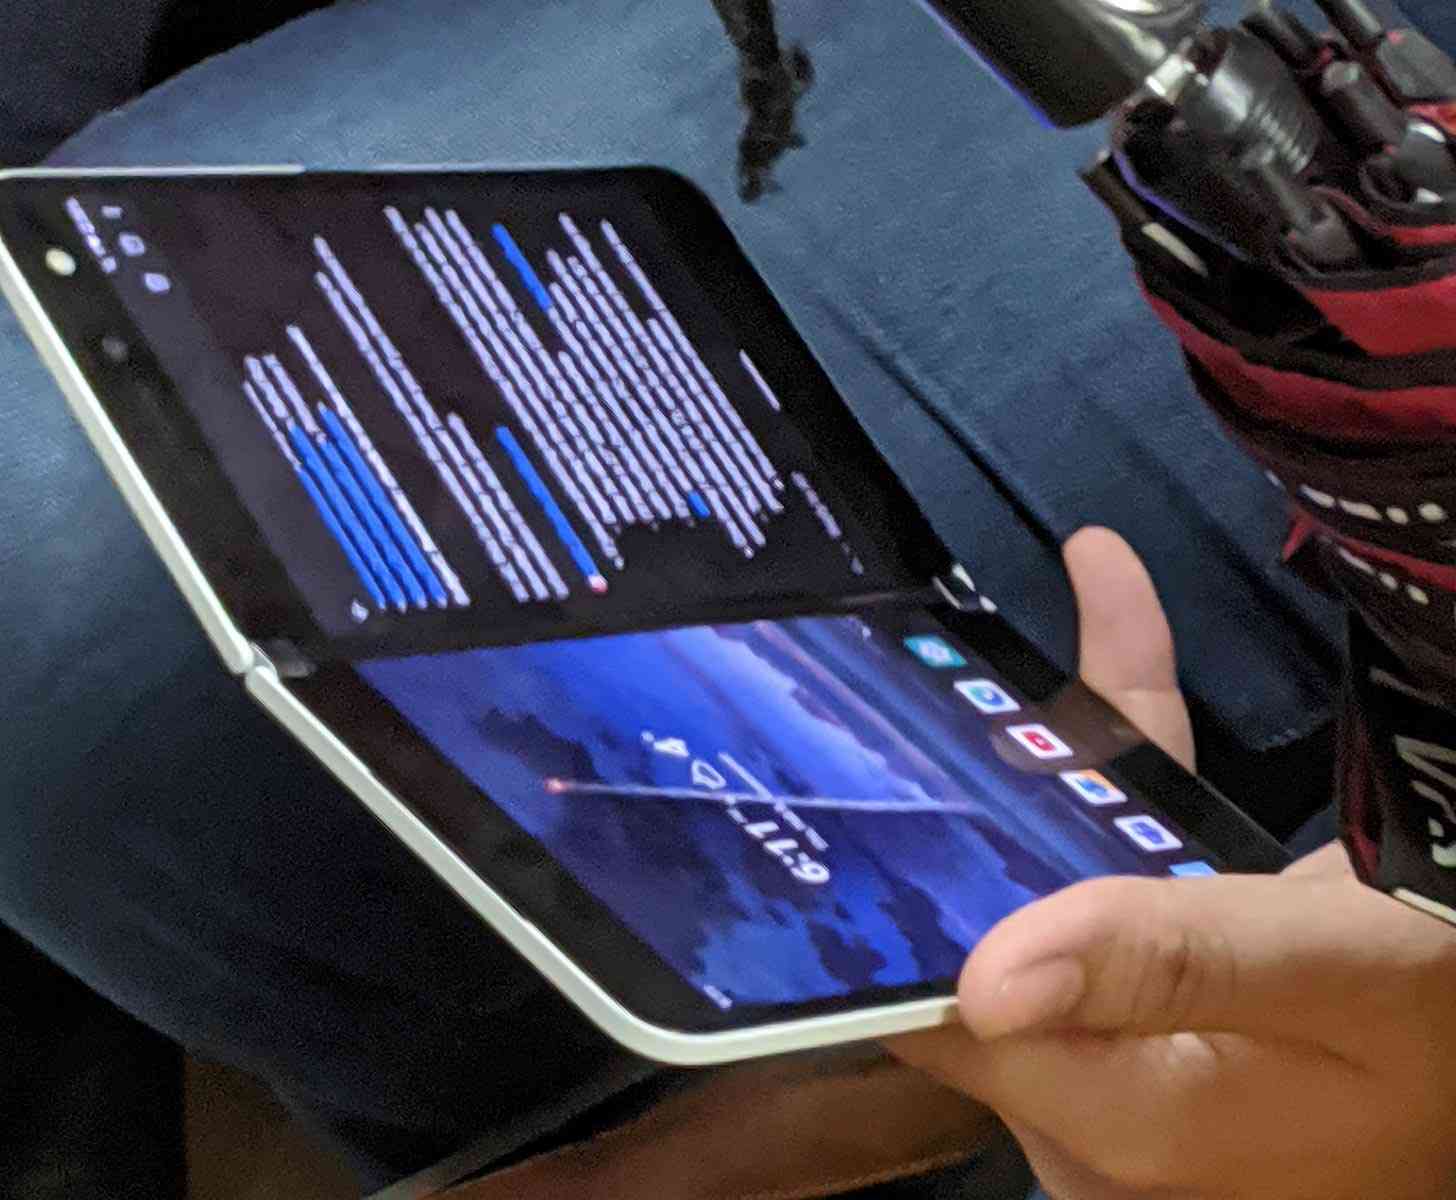 Microsoft Surface Duo in the wild